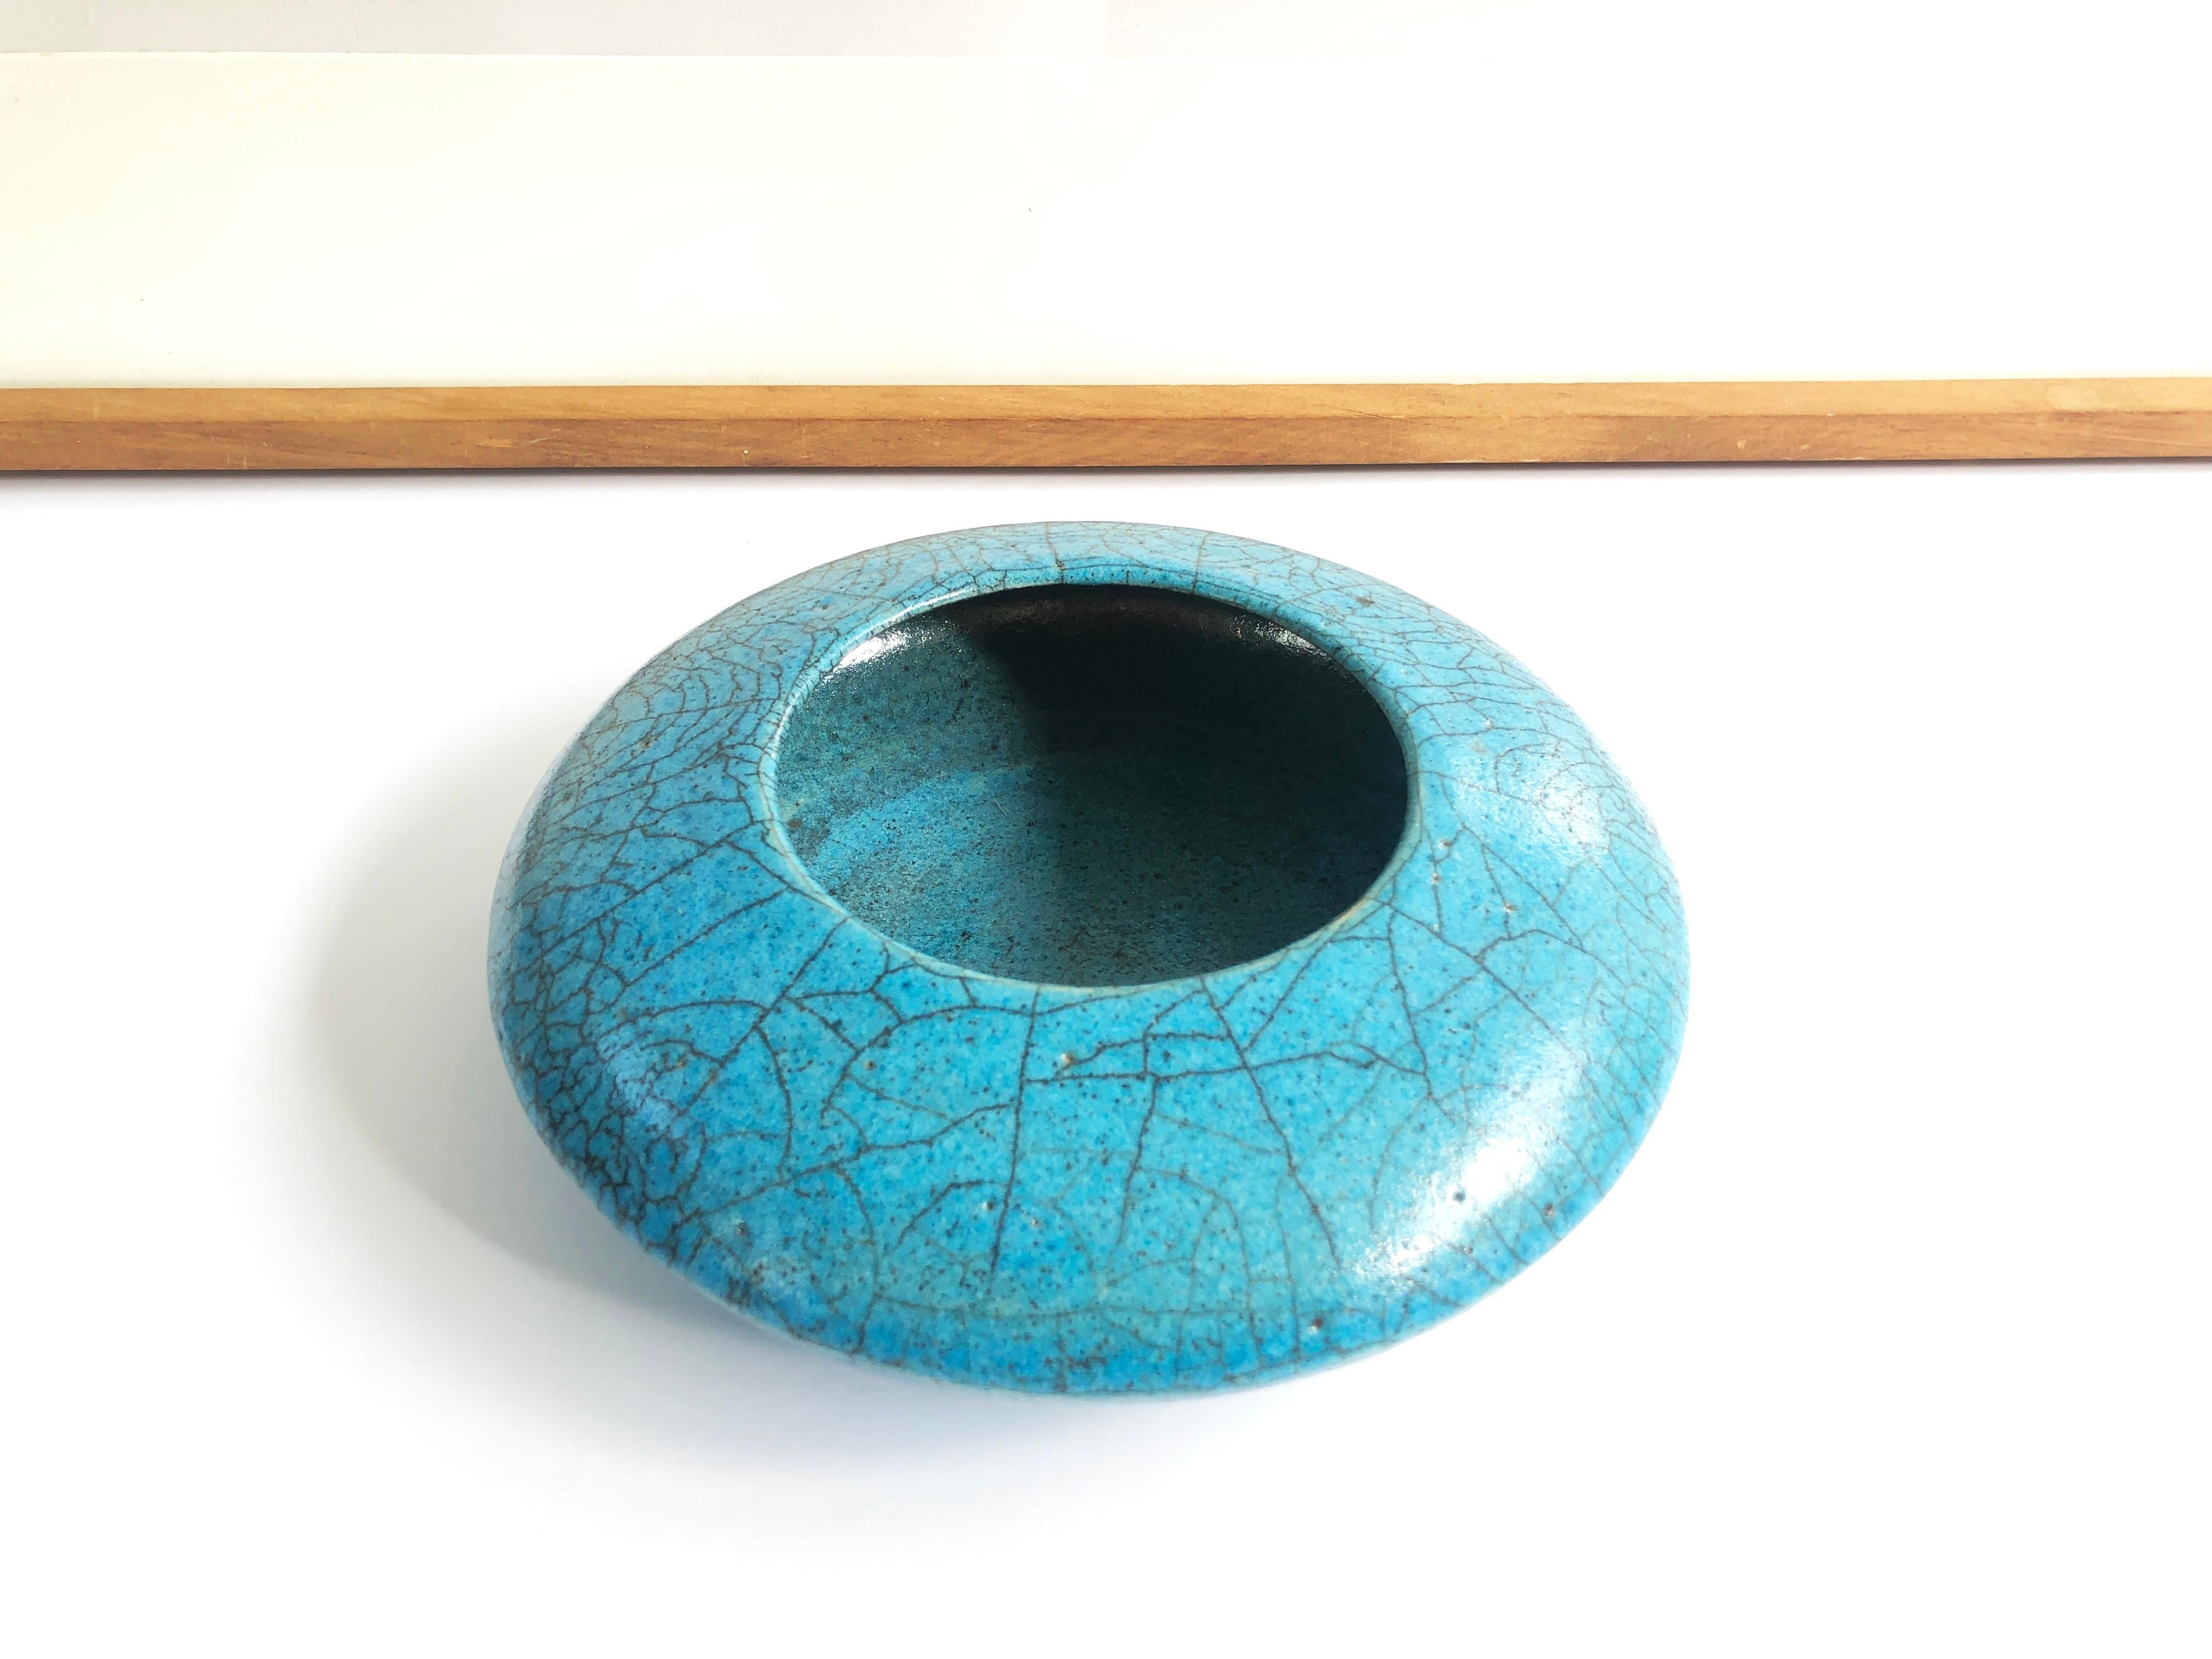 Mid-Century Modern Turquoise Raku Ceramic Vase Discus Japanese Style, ca. 1975, possibly Germany For Sale